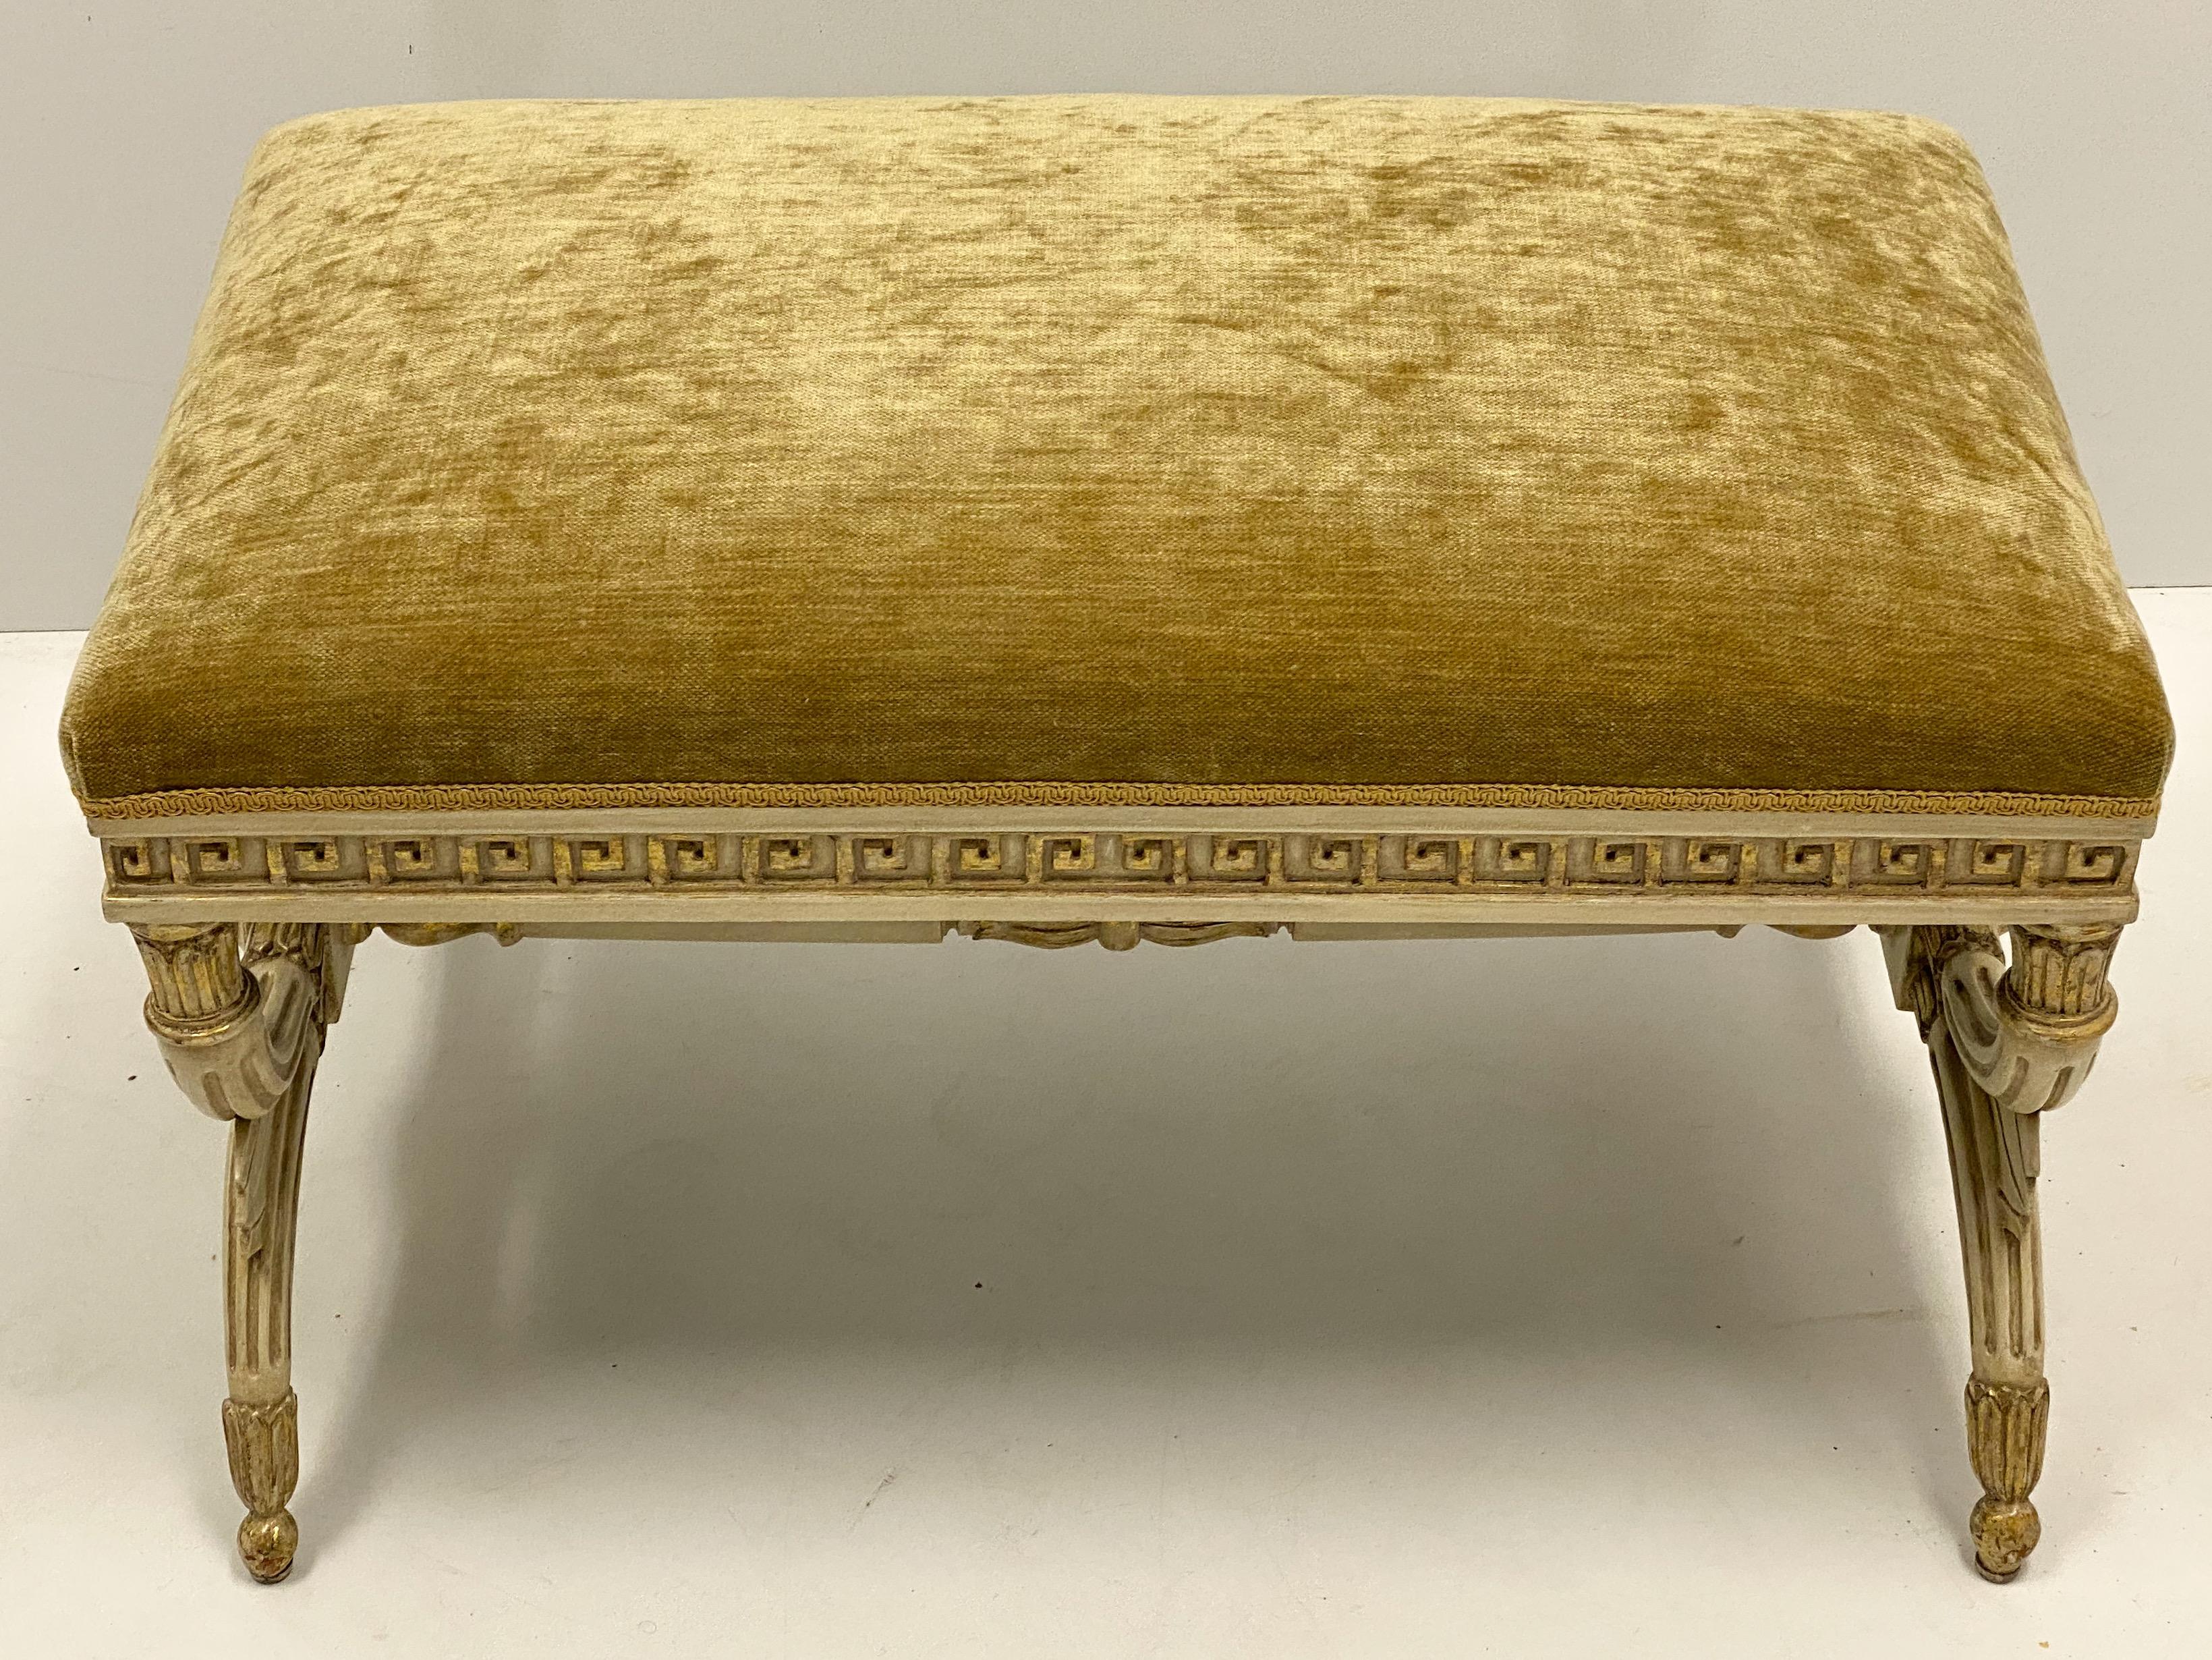 Neoclassical Italian Parcel Gilt Neo-Classical Style Bench